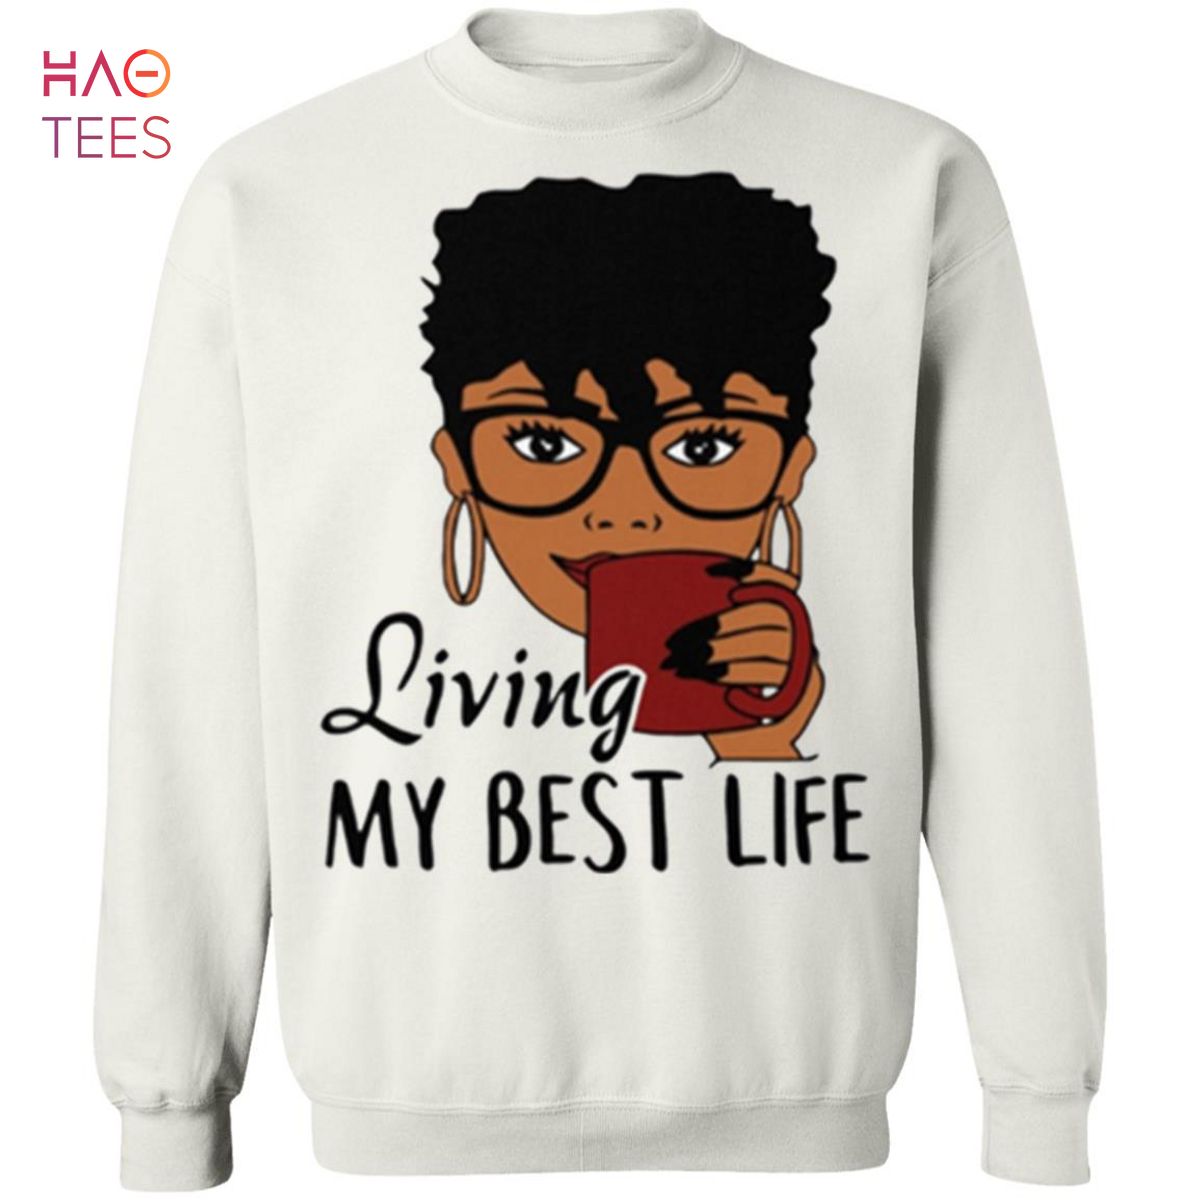 [NEW] Living My Best Life Sweater